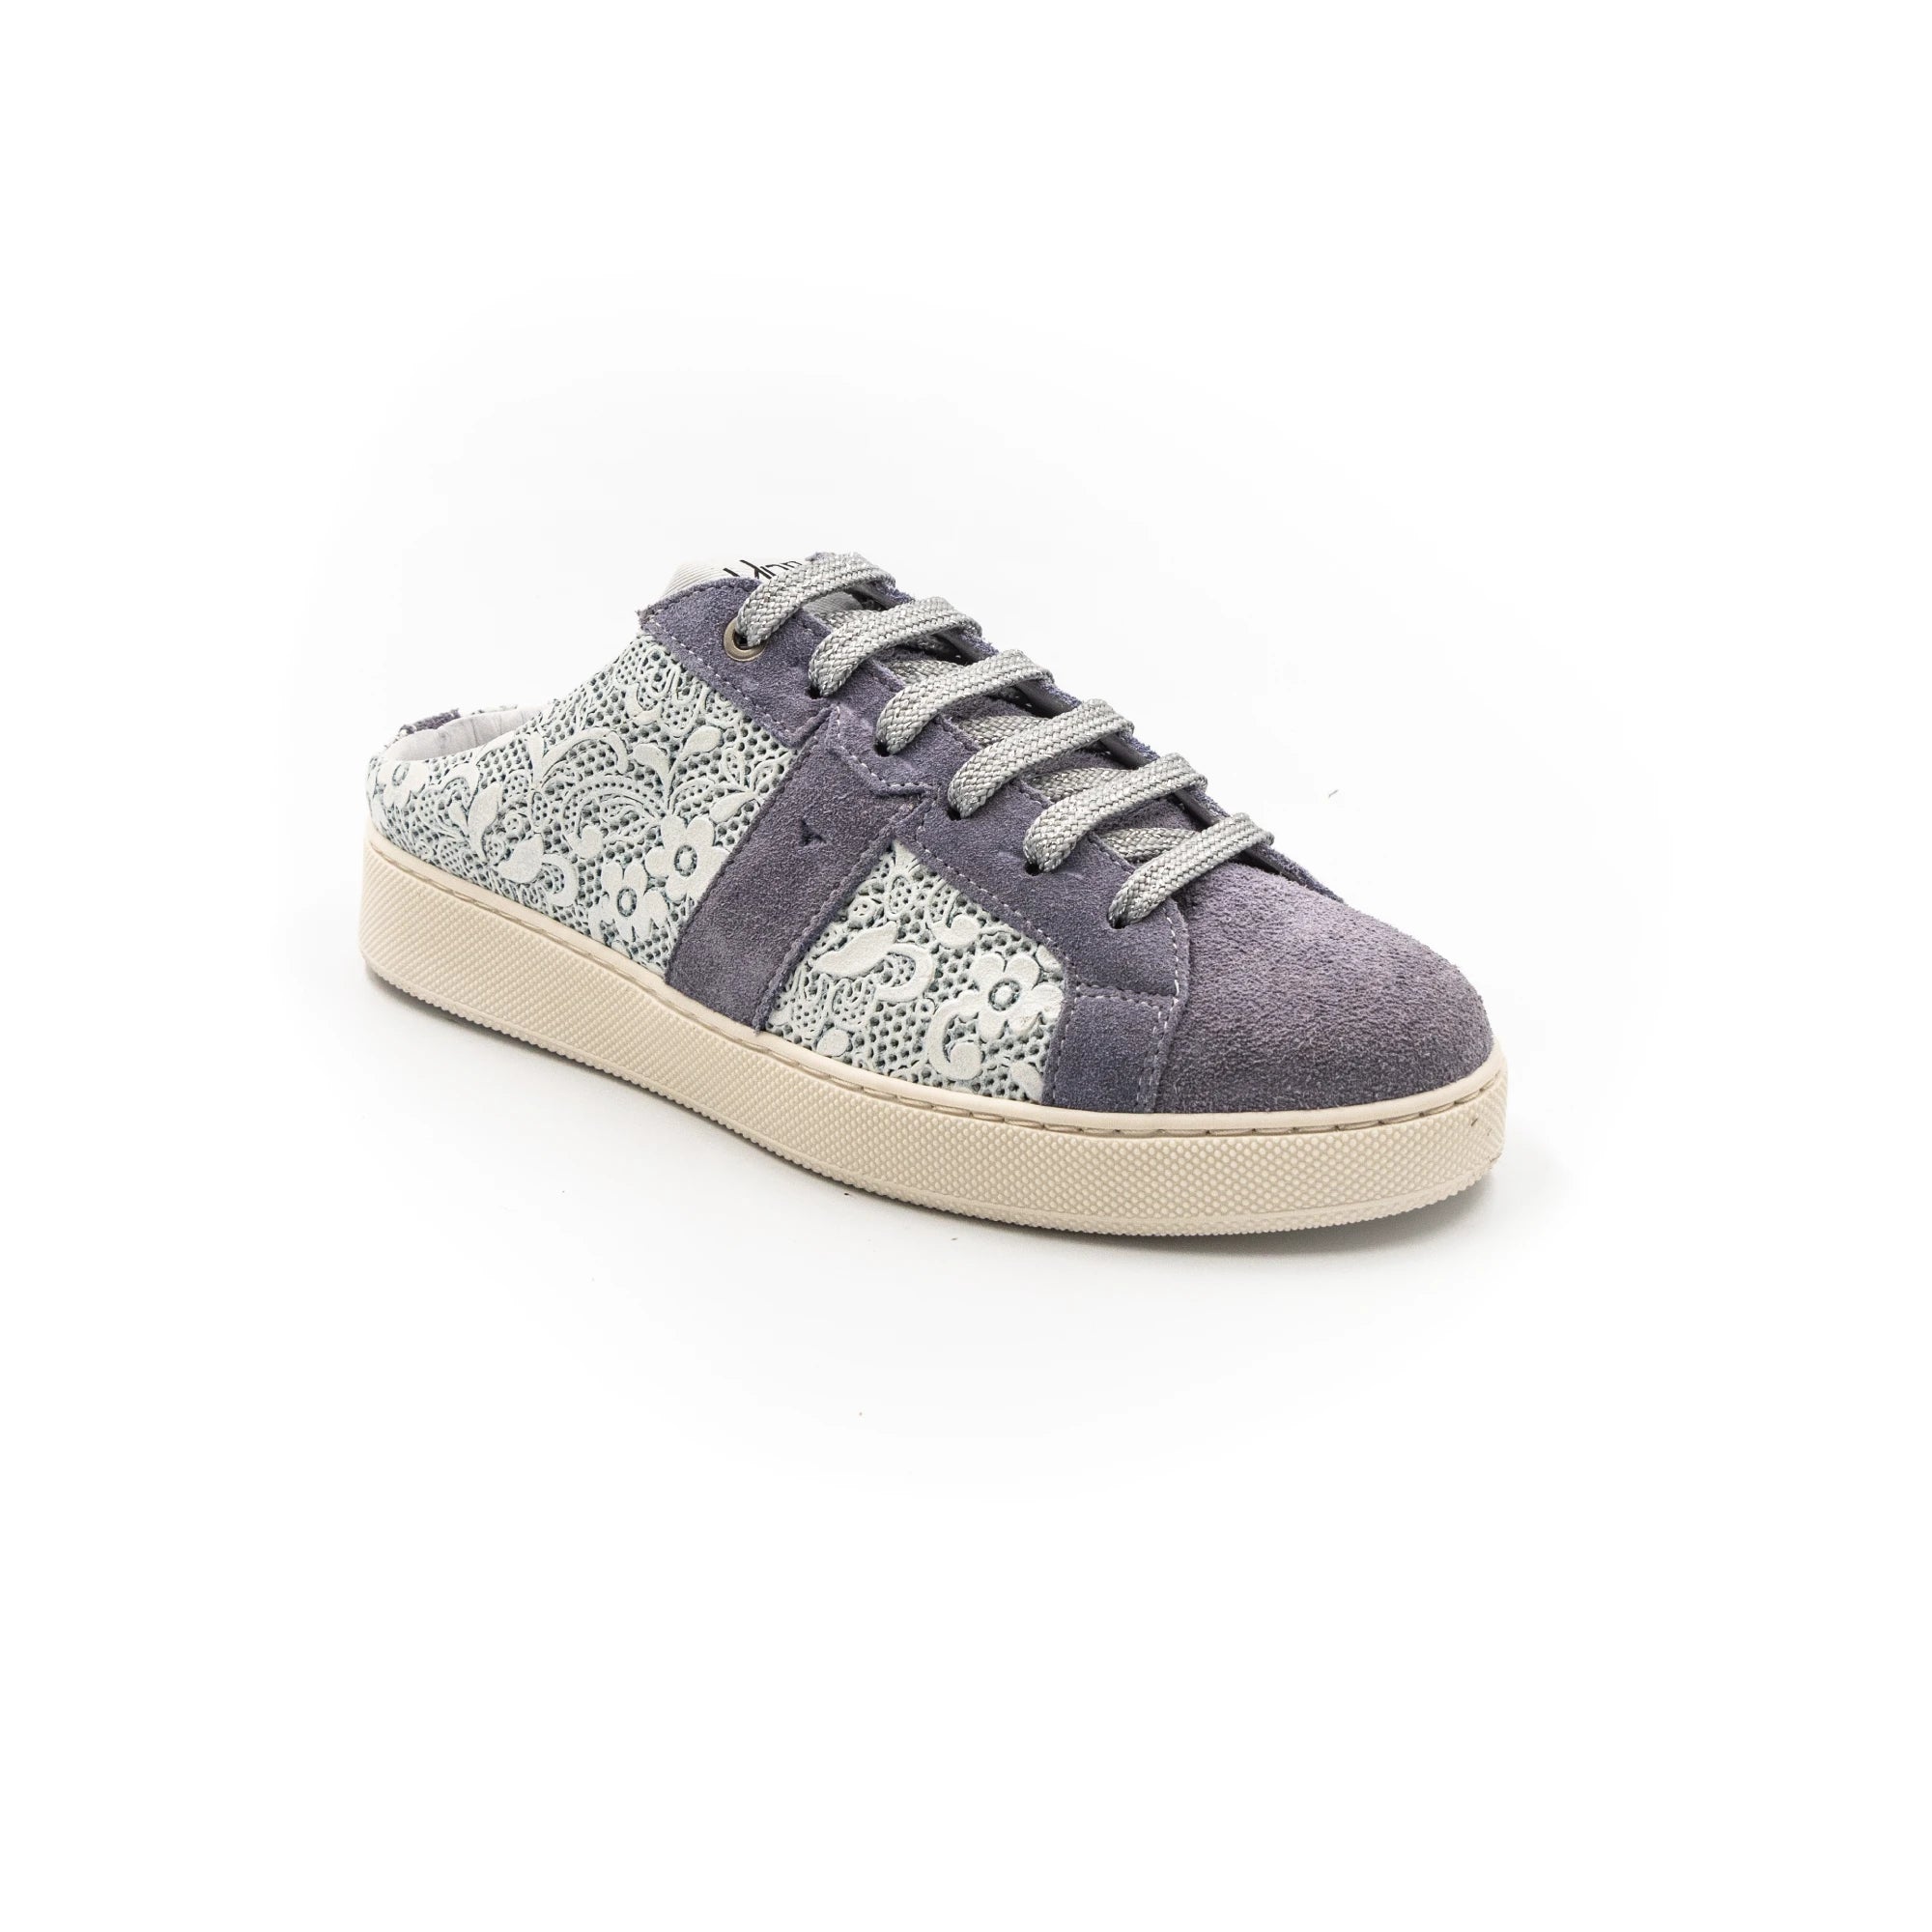 Purple sneakers with white lace and beige rubber.